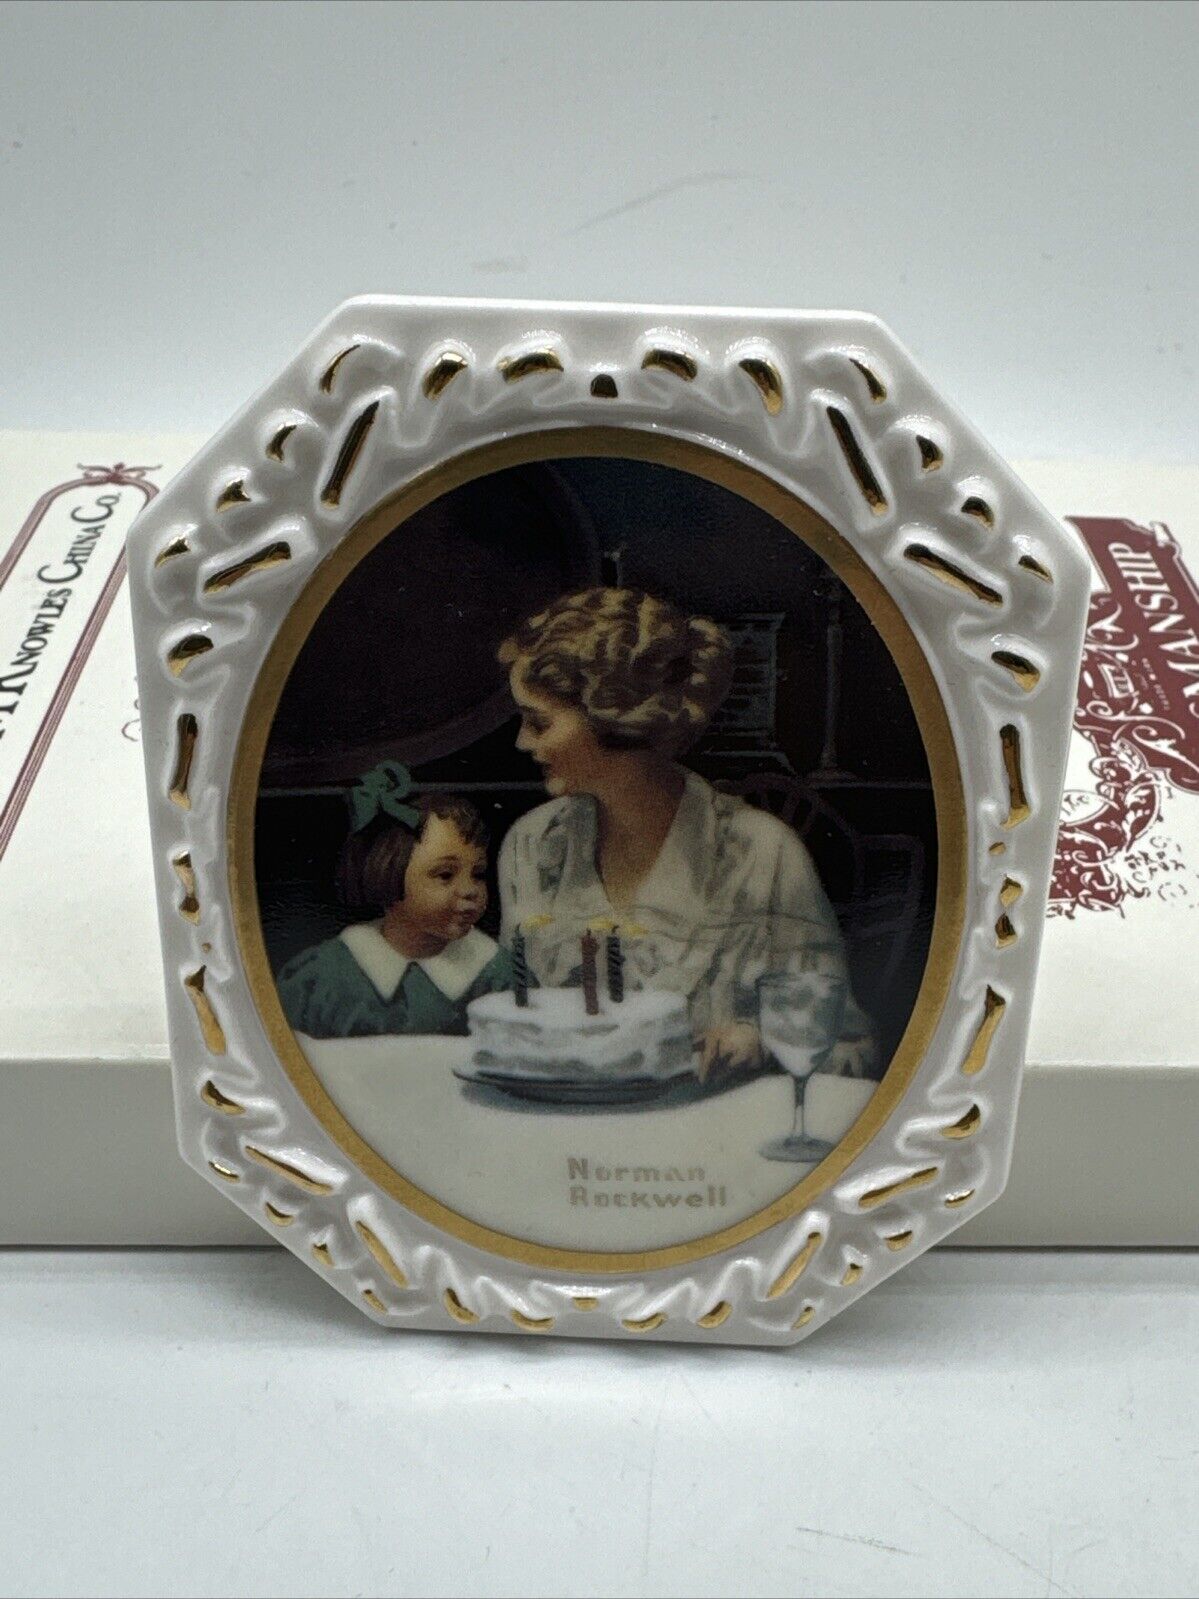 Rockwell’s Tender Moments “Make A Wish” ArtCameo Collection 1991 (#A0468)